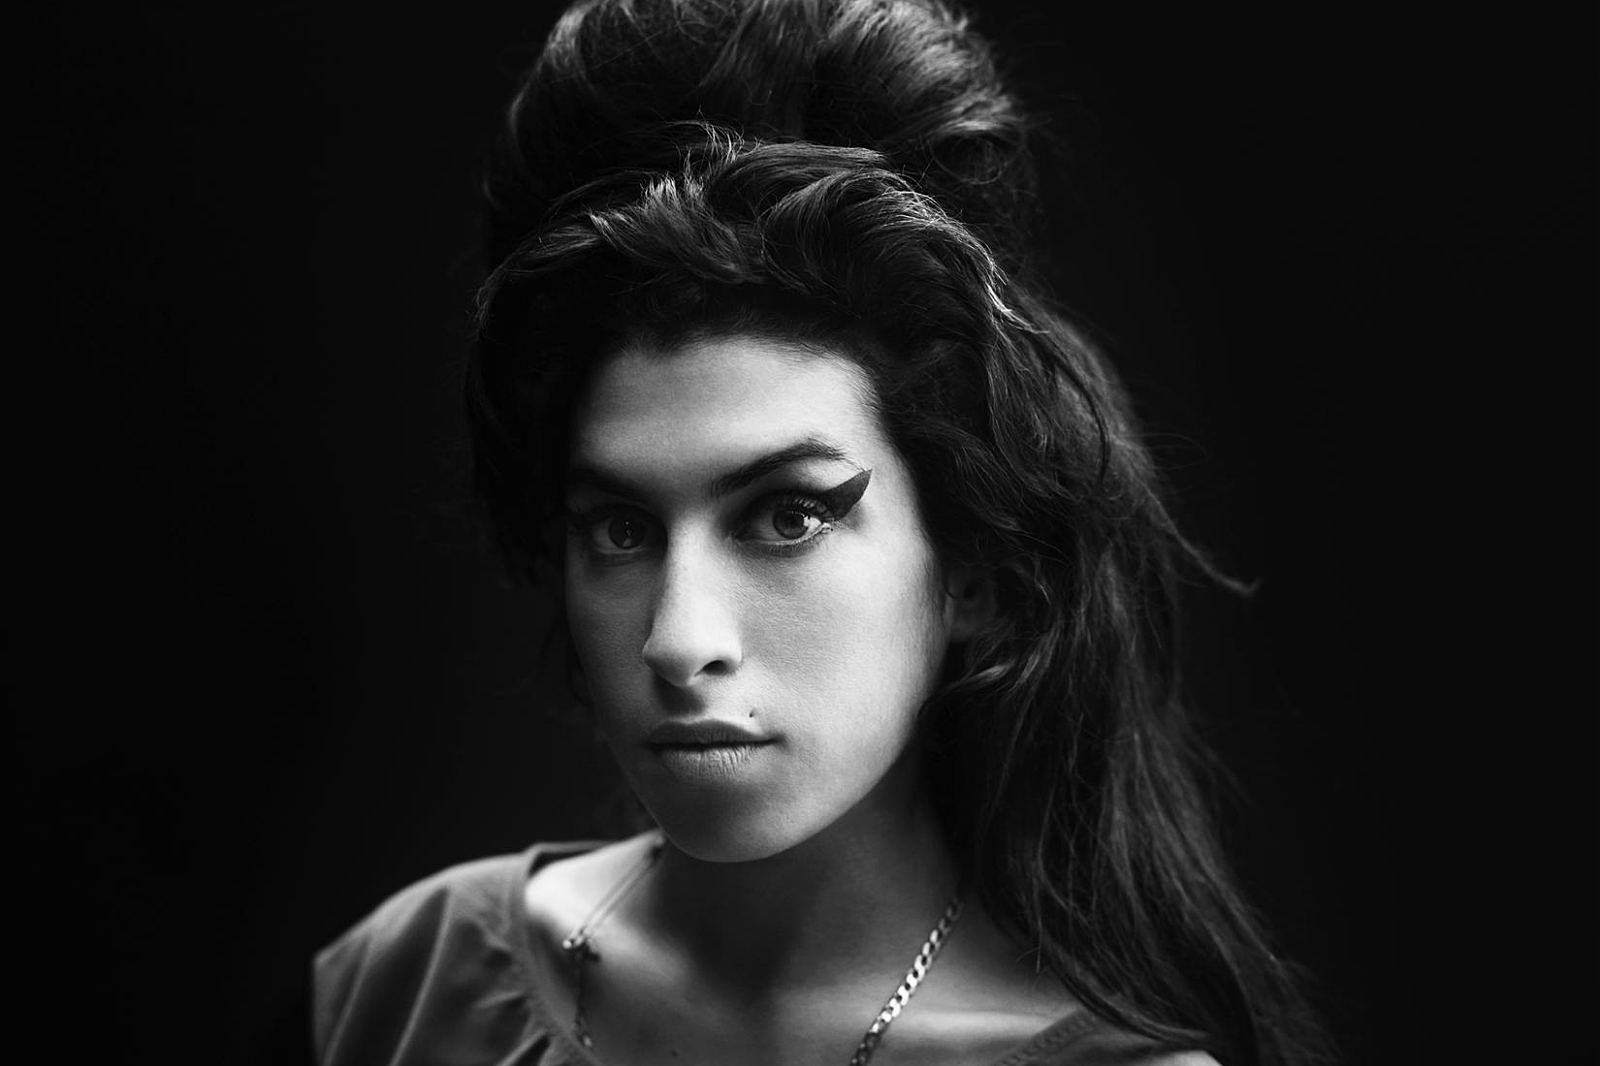 Watch previously unseen footage of Amy Winehouse recording with Mark Ronson